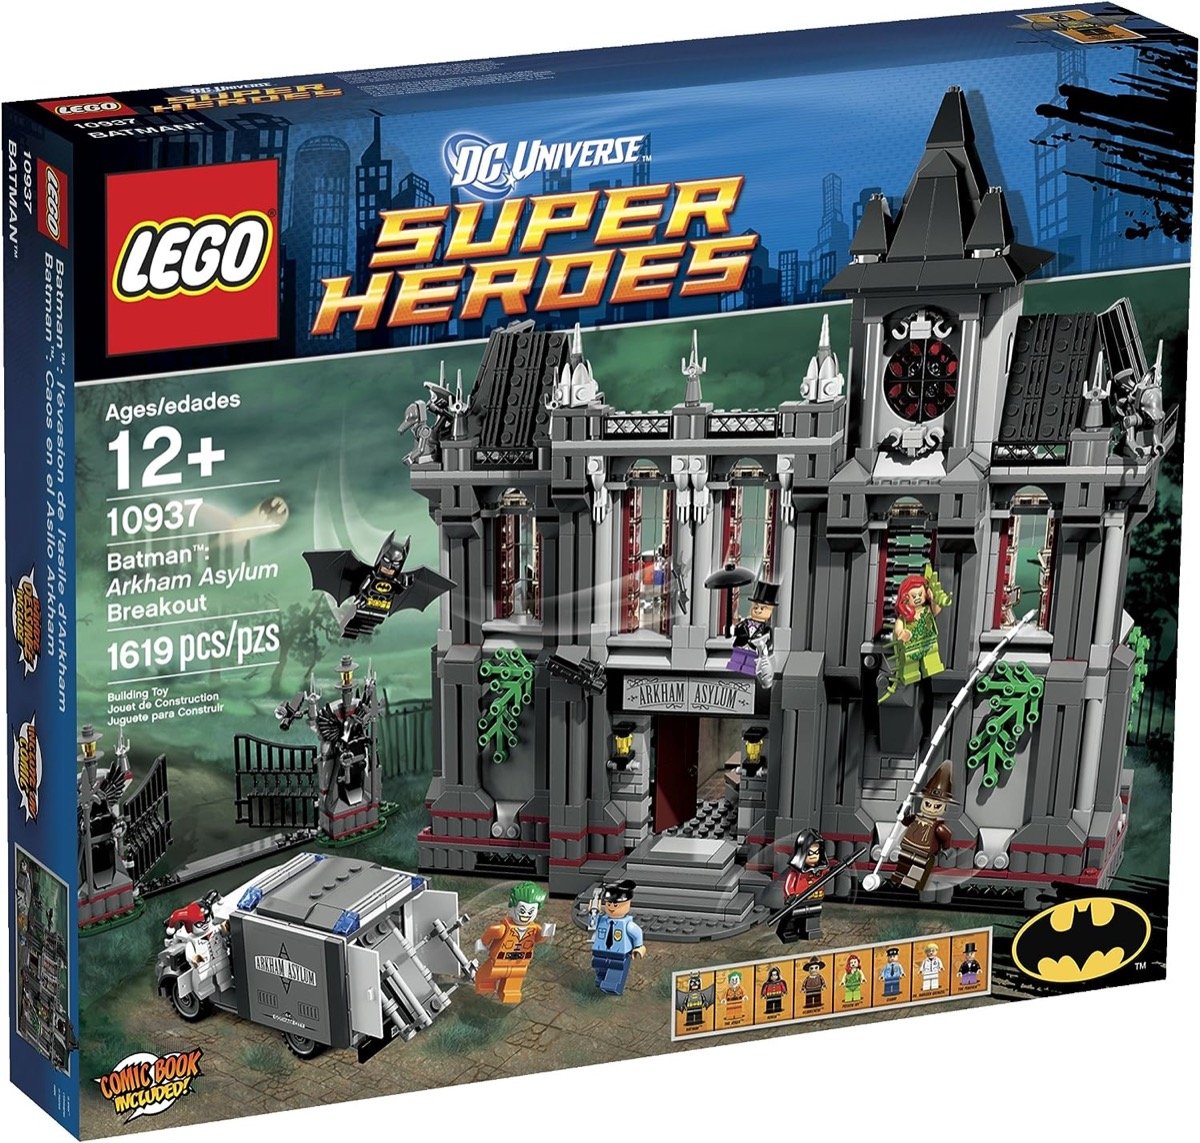 The LEGO Rogue's Galley break out of Arkham Asylum